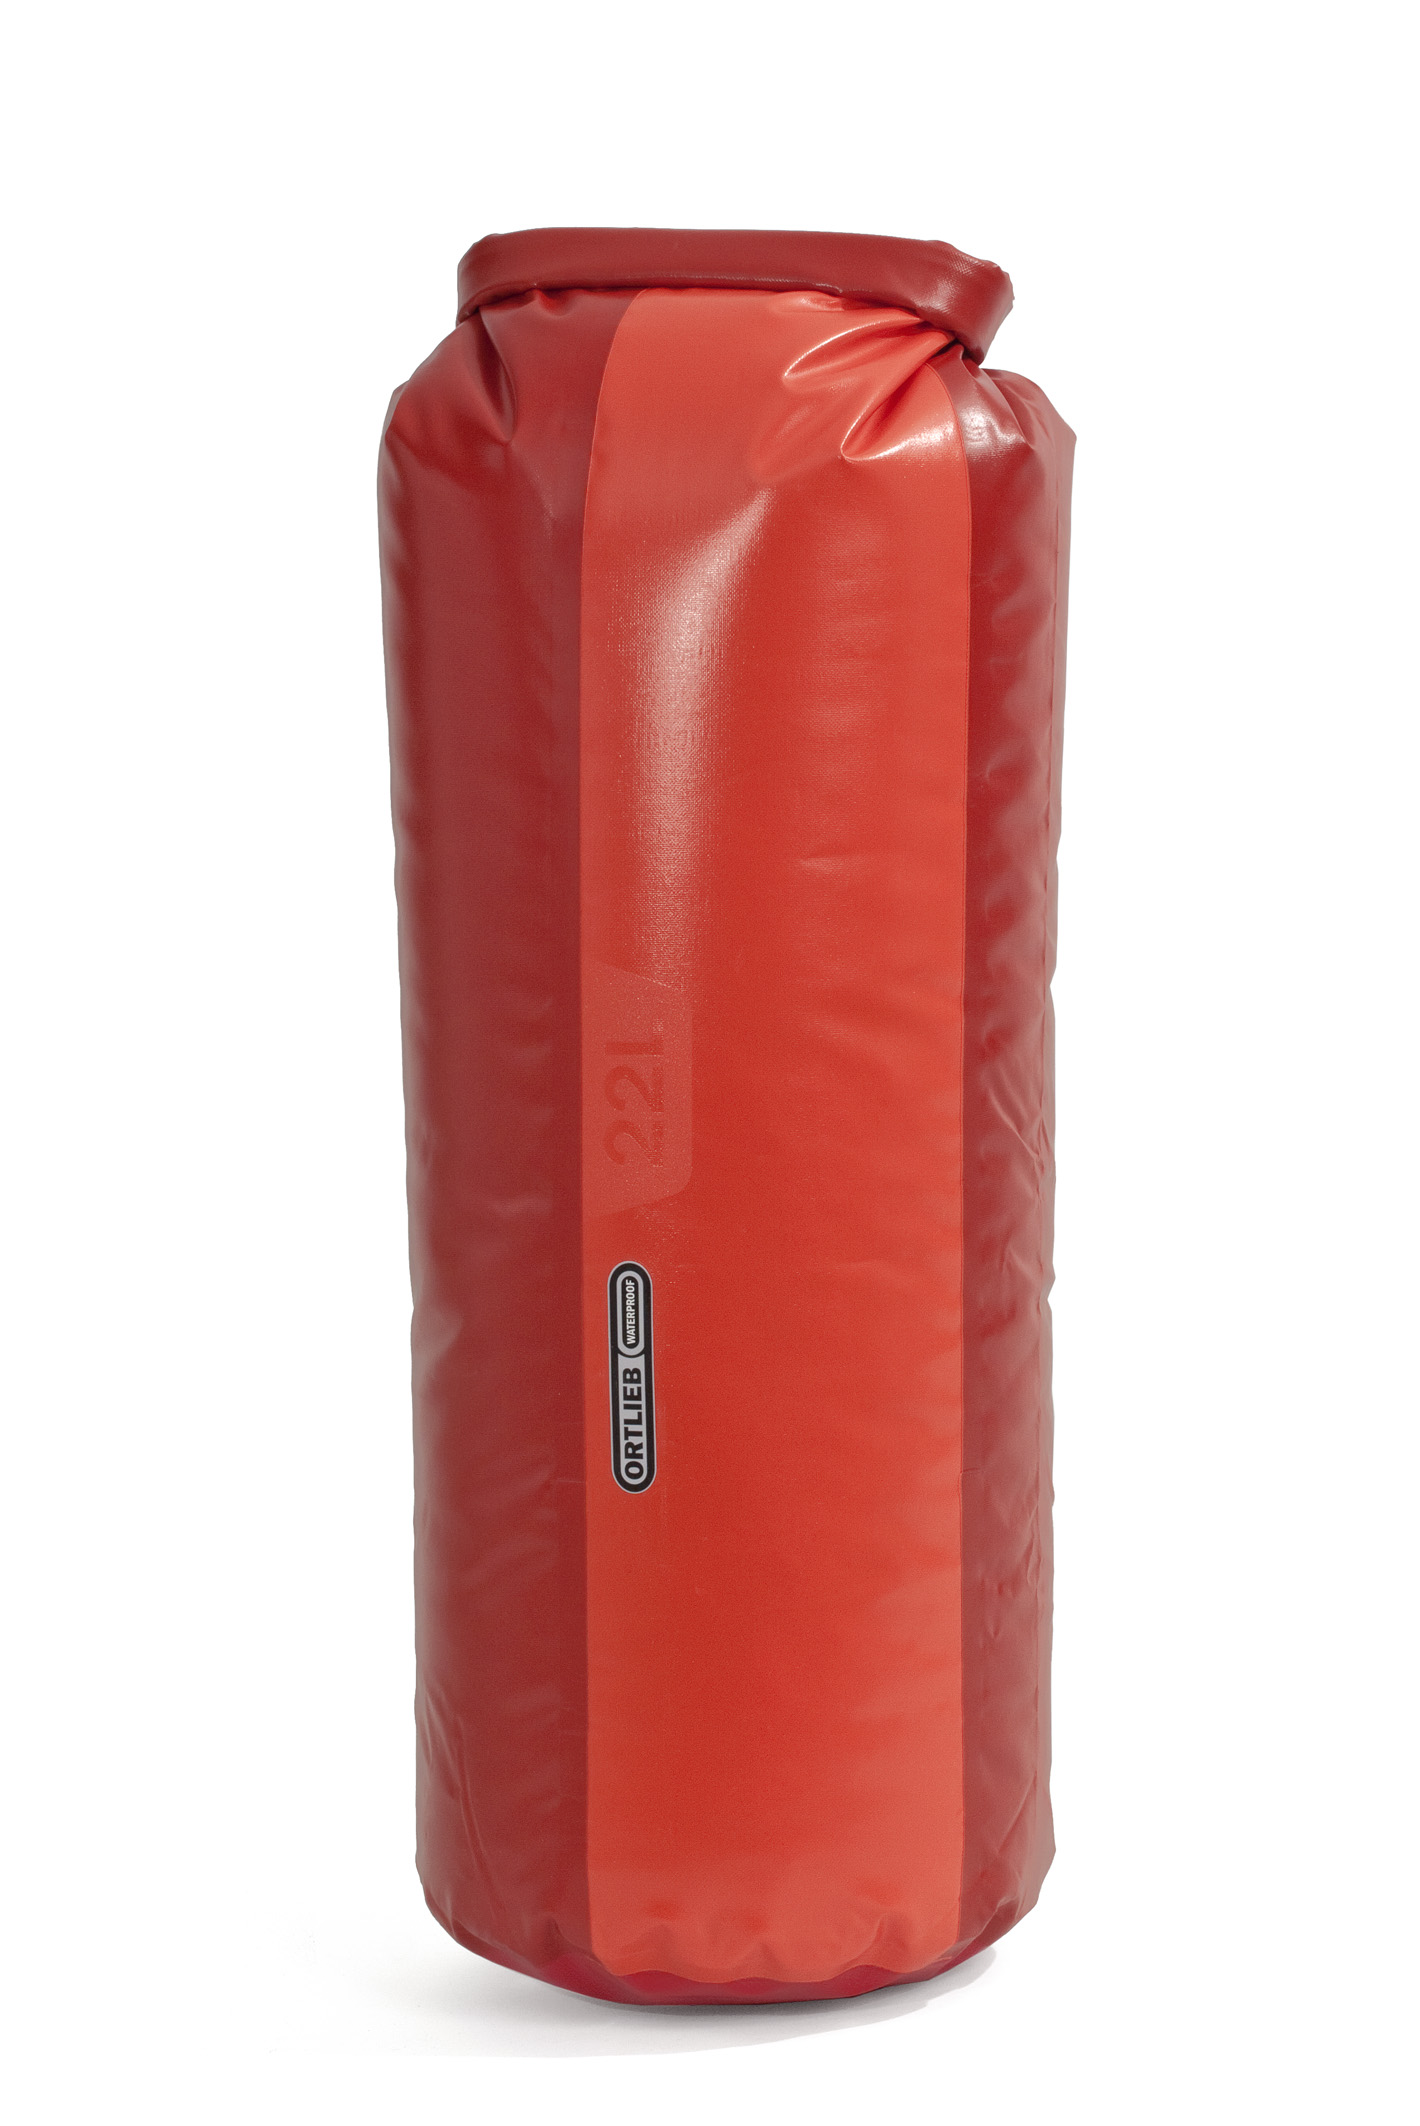 Ortlieb "Dry-Bag PD350" - Cranberry